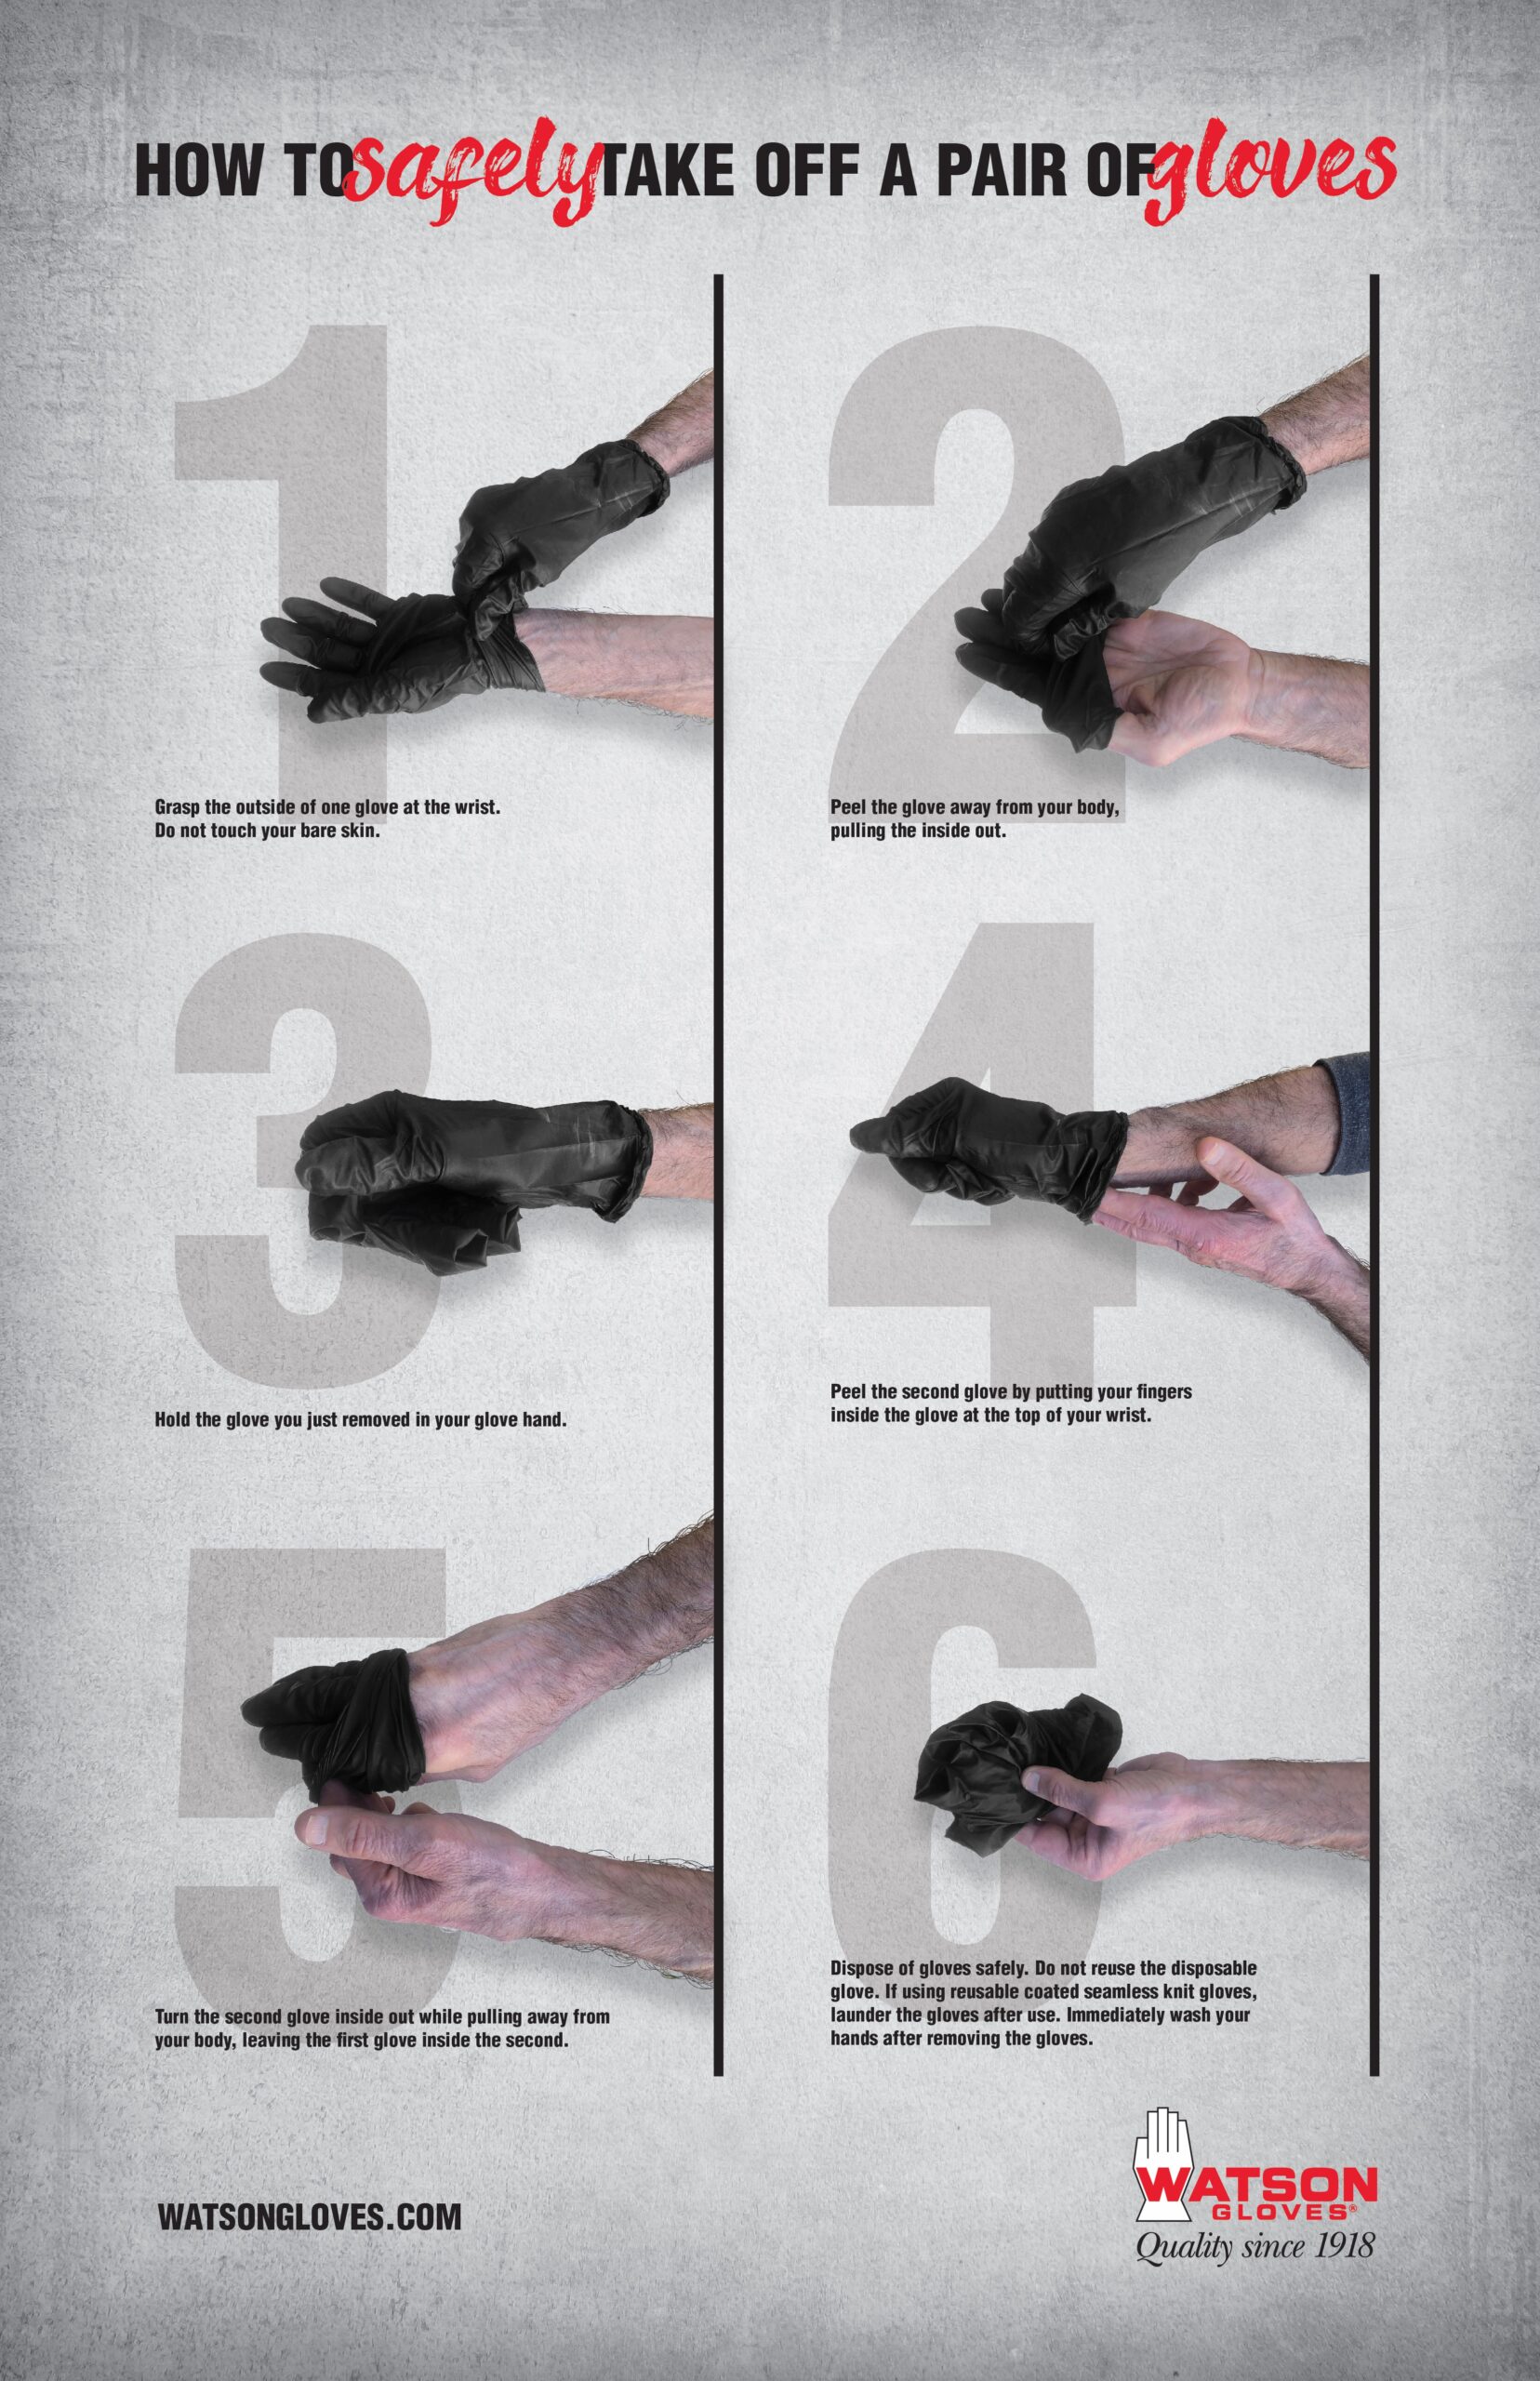 How To Safely Take Off a Pair of Gloves Poster Watson Gloves